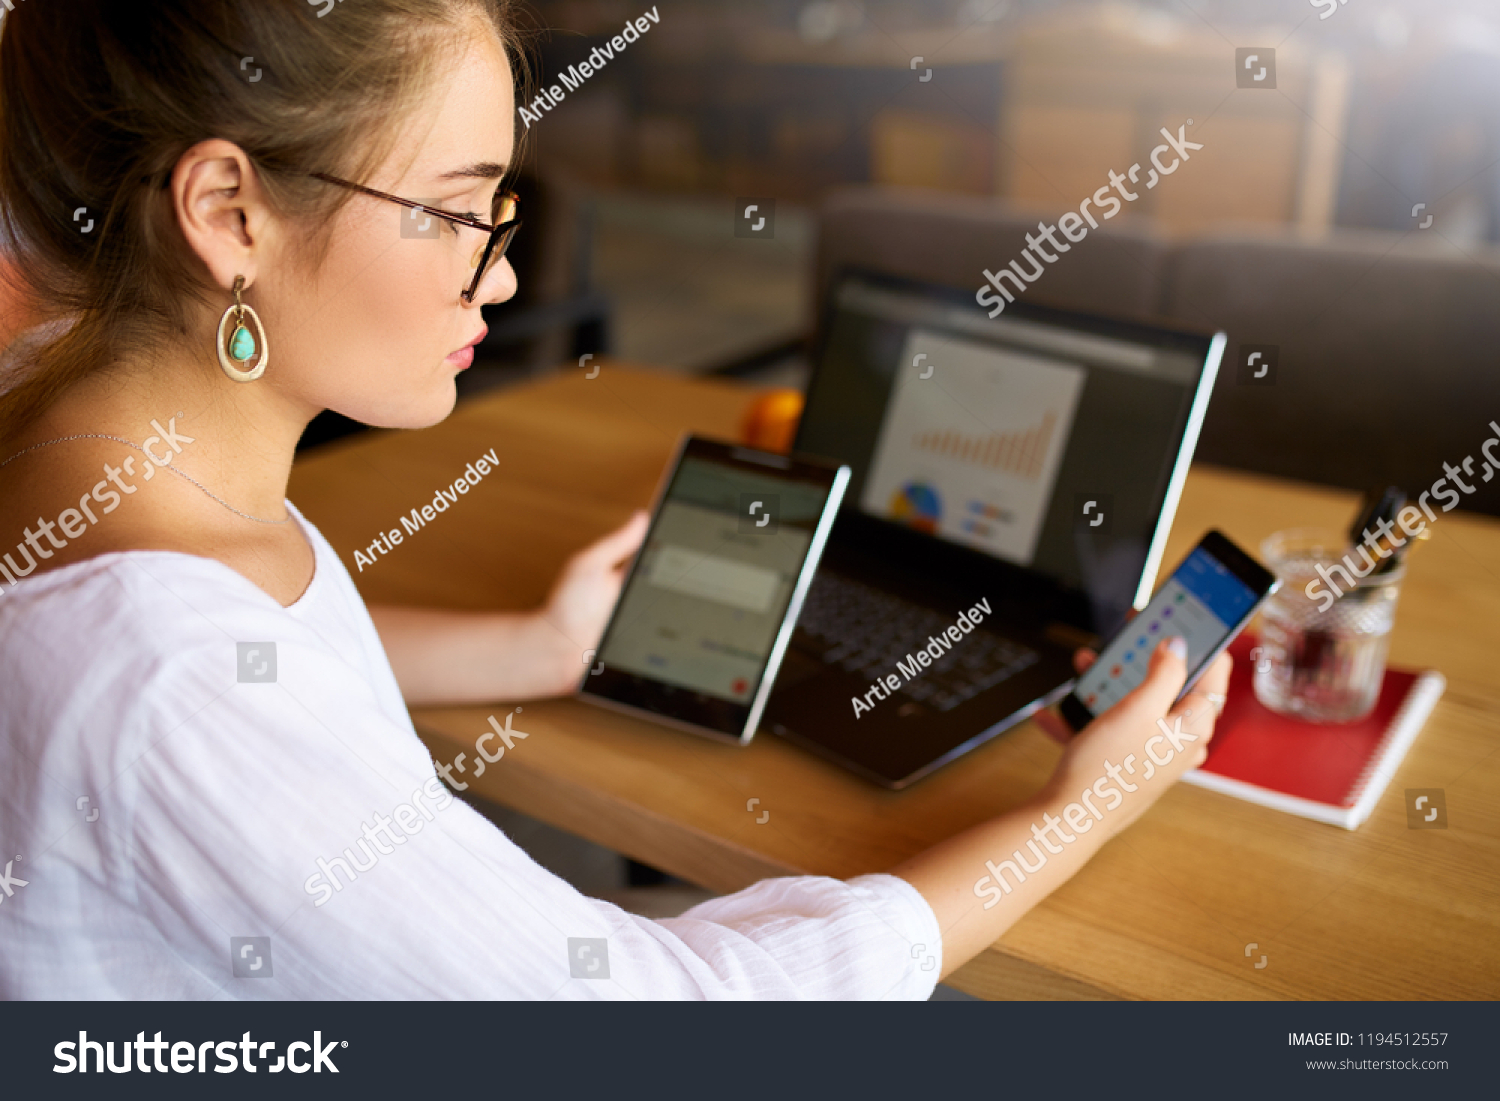 Mixed race woman in glasses working with multiple electronic internet devices. Freelancer businesswoman has tablet and cellphone in hands and laptop on table with charts on screen. Multitasking theme #1194512557